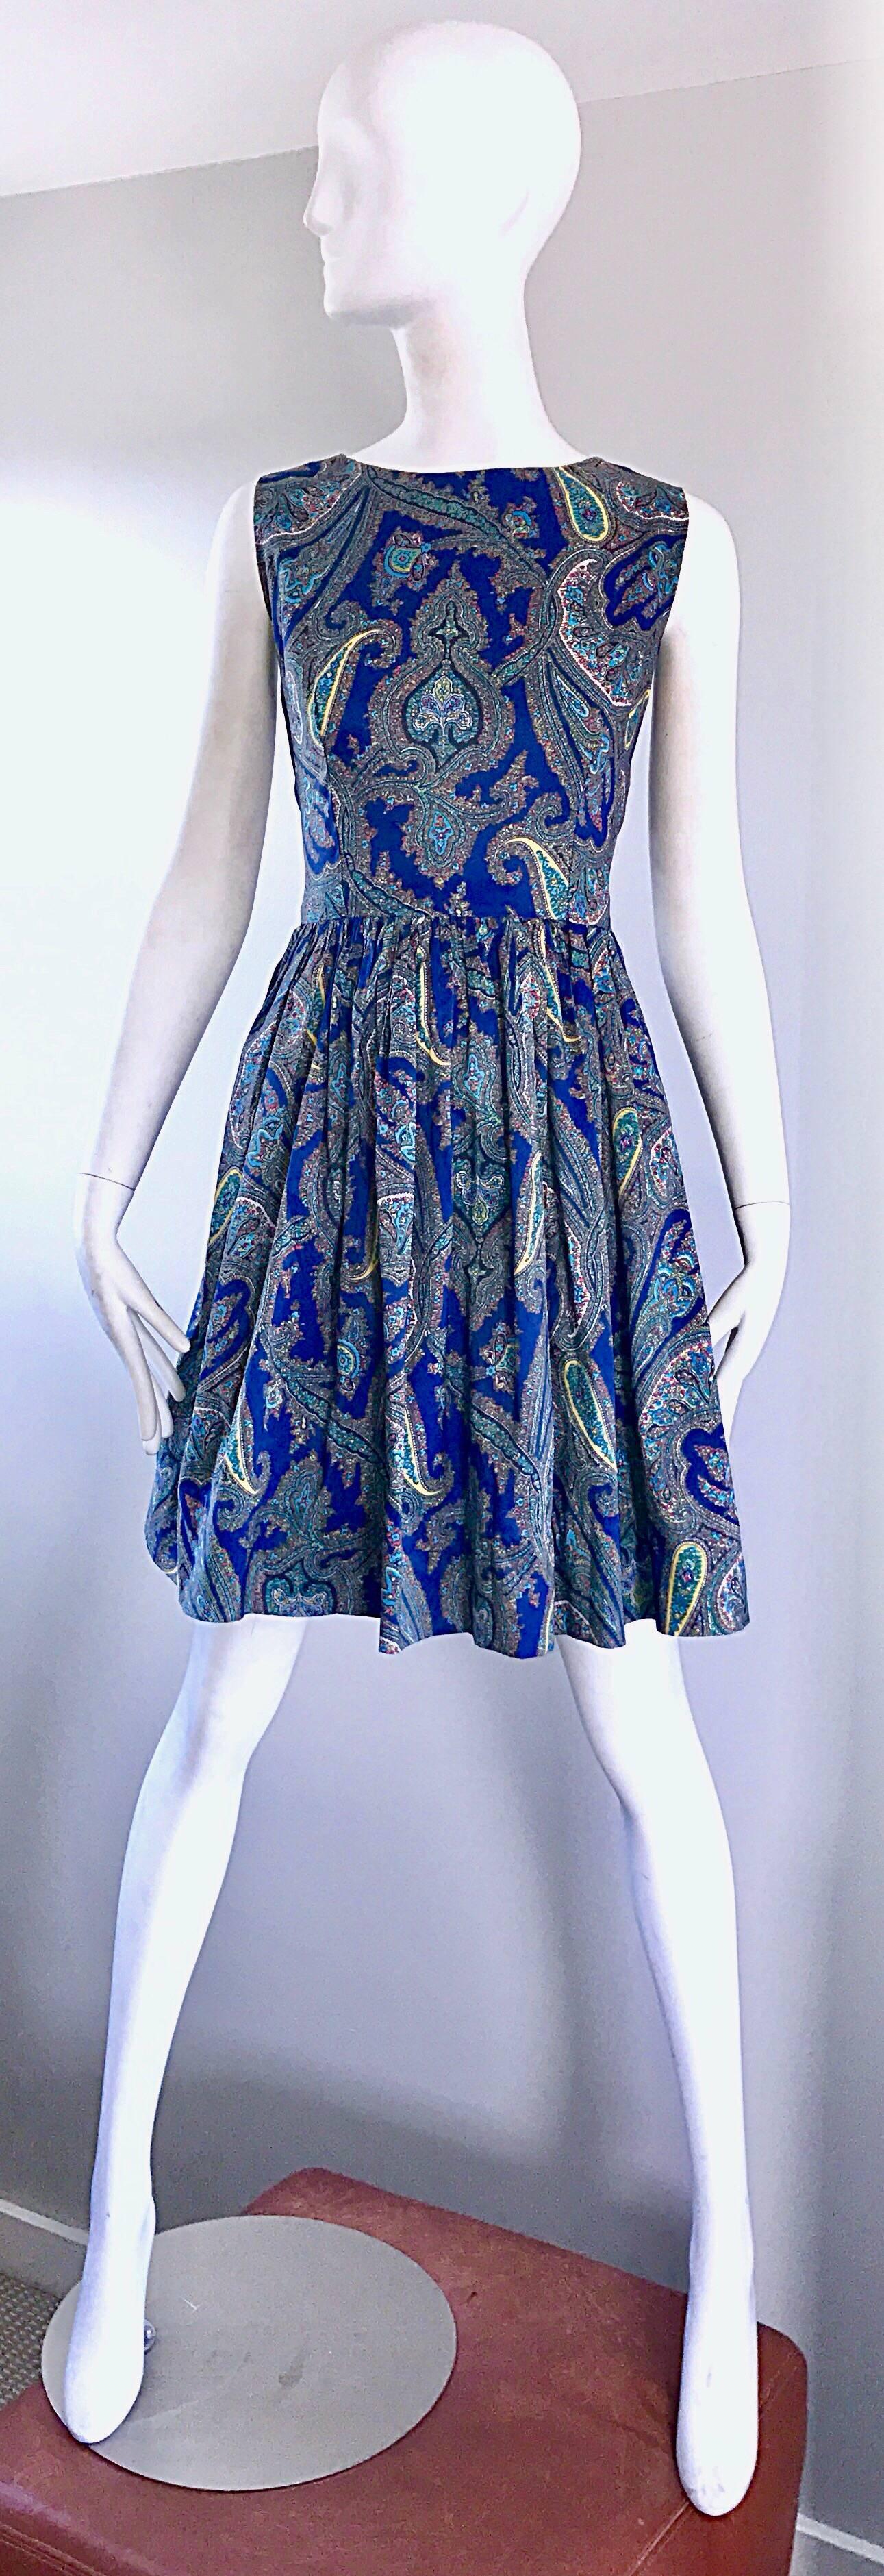 Beautiful 1950s blue paisley fit and flare sleeveless silk dress! Features a vibrant blue backdrop, with colorful paisley prints in pink, yellow, turquoise, teal, and green. Fitted bodice, with a flattering and forgiving full skirt that could also